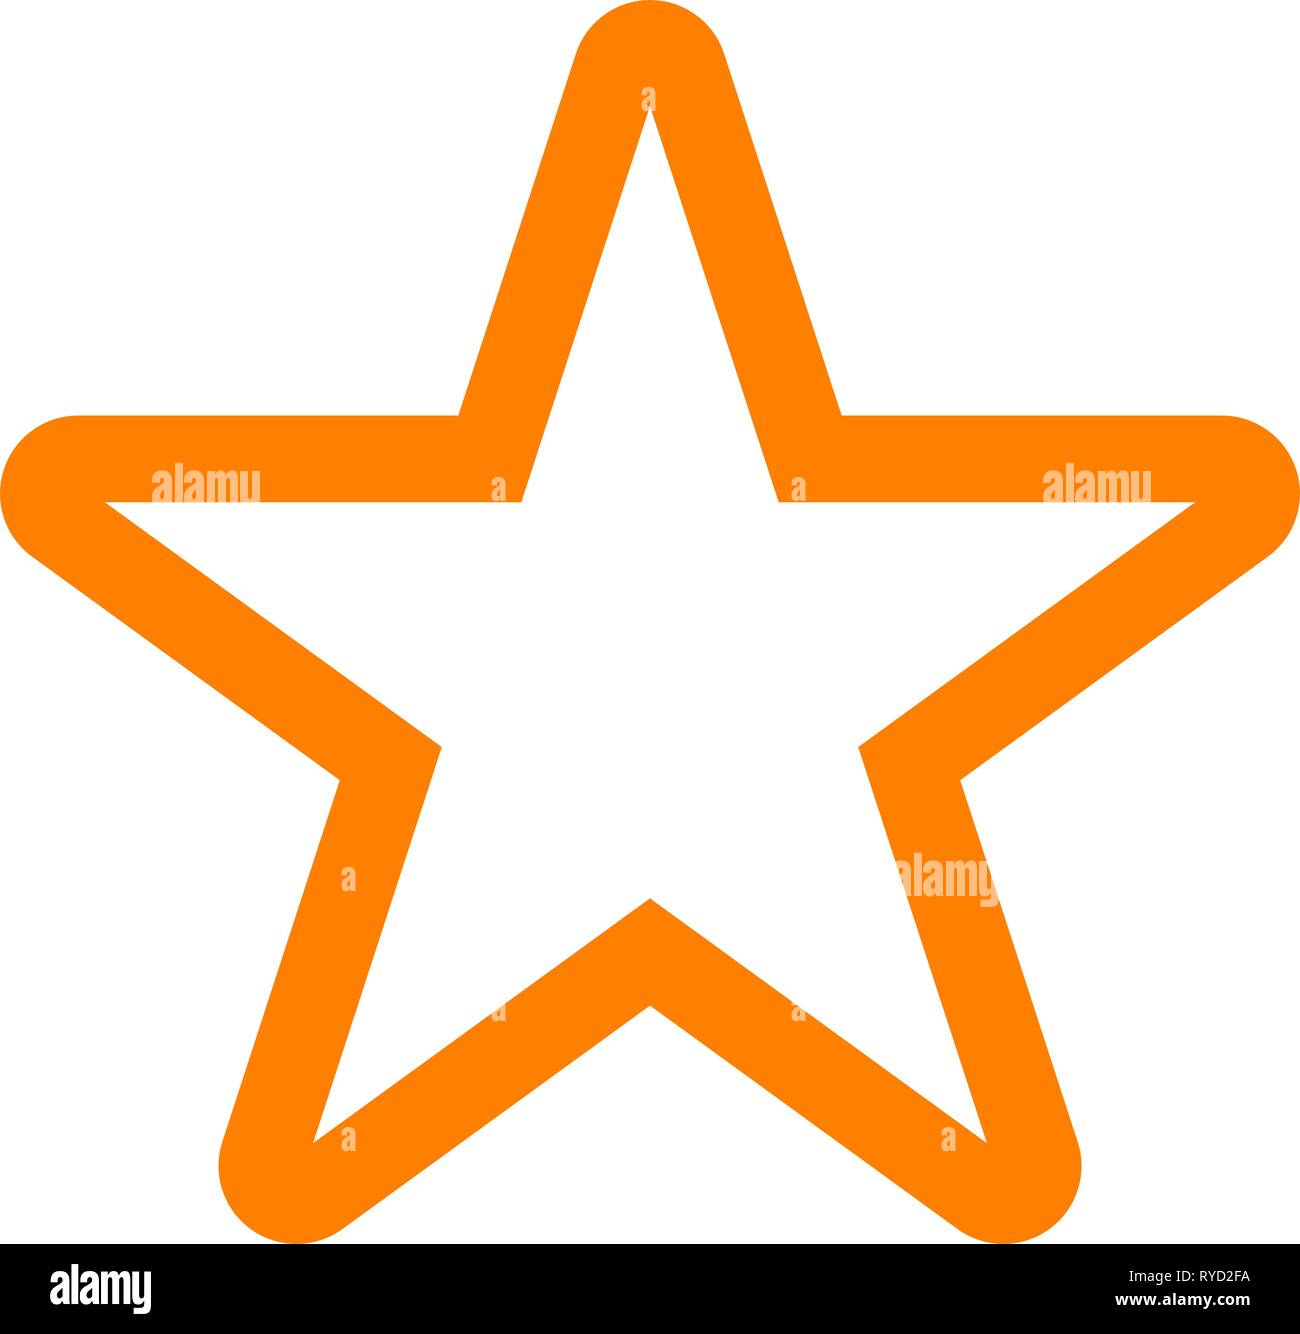 Star symbol icon - orange simple outline, 5 pointed rounded, isolated - vector illustration Stock Vector